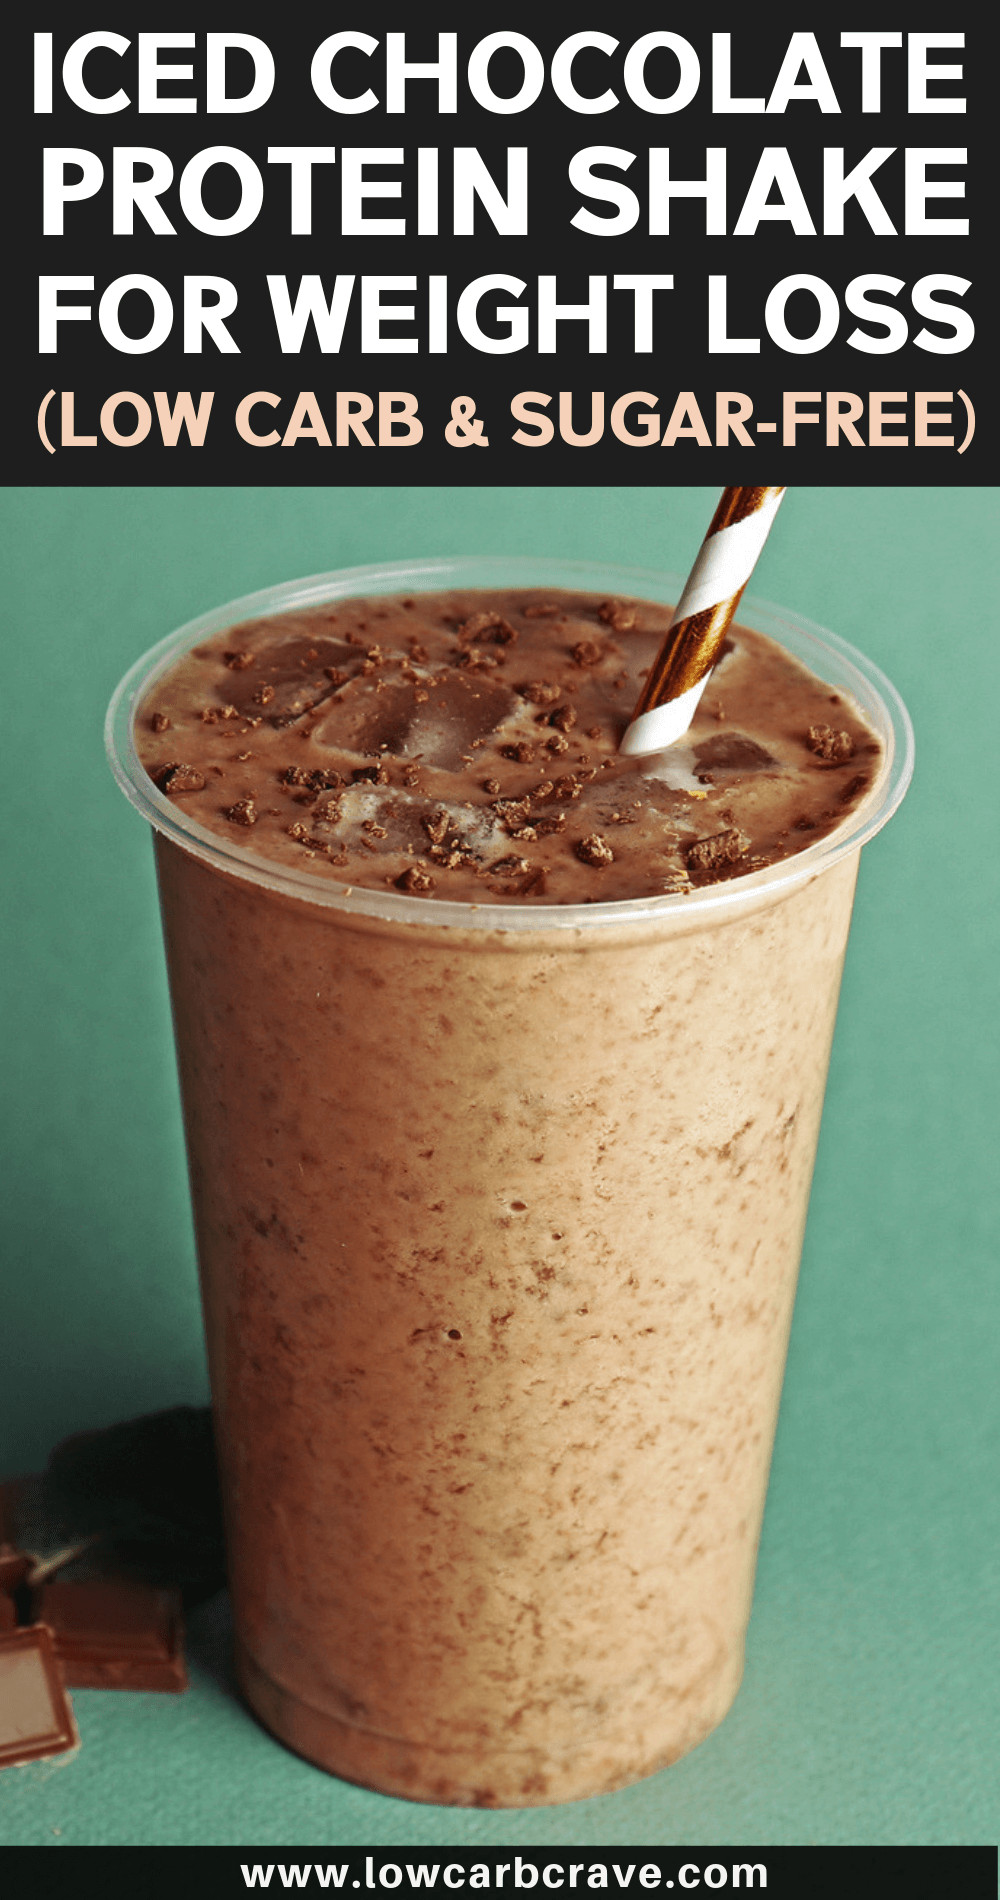 Low Carb Protein Shake Recipes For Weight Loss
 Easy Keto Iced Chocolate Protein Shake Low Carb Crave